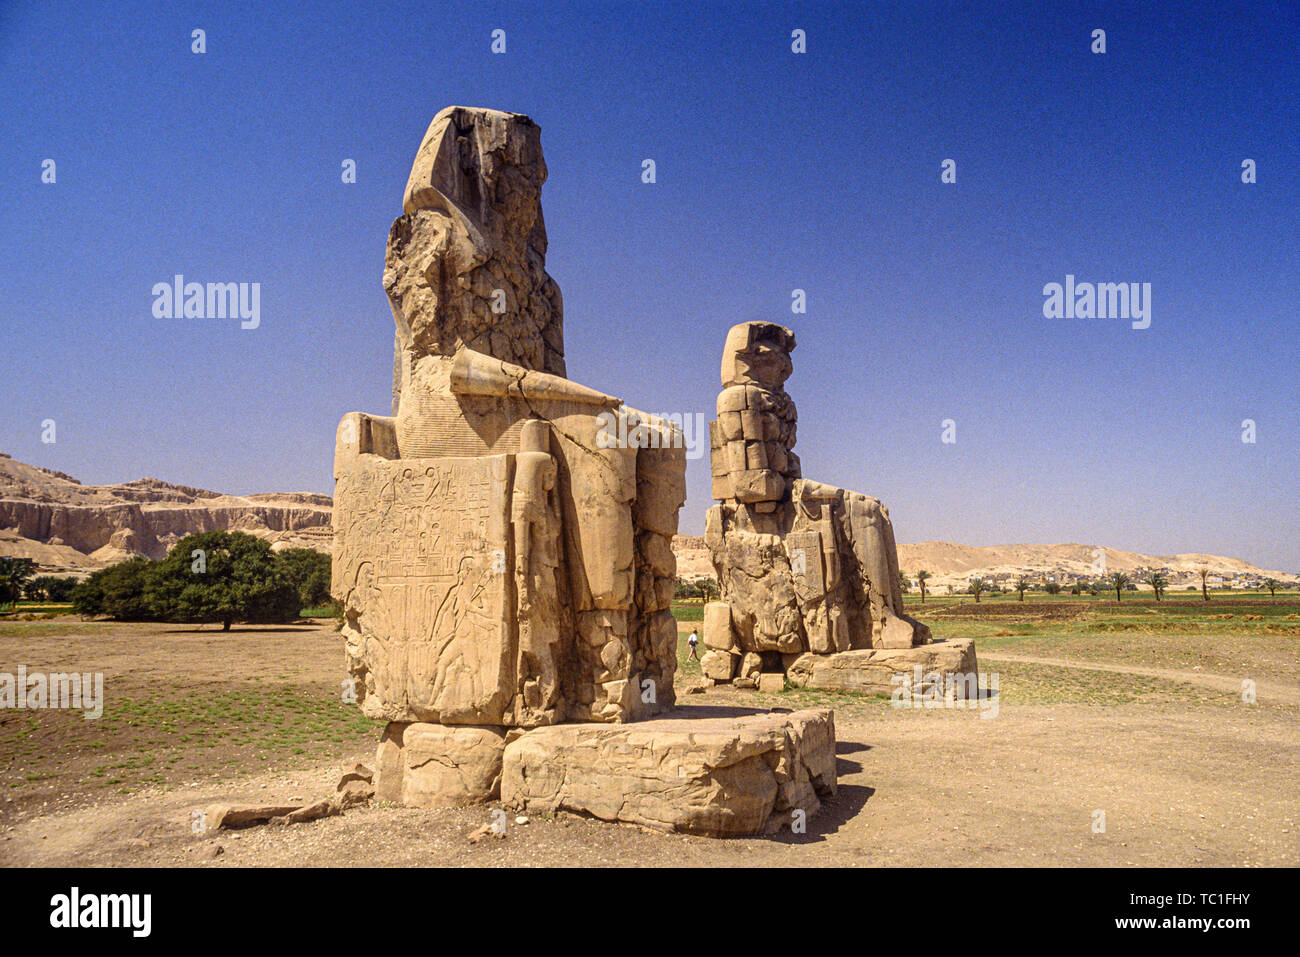 Luxor, Egypt. The Colossi of Memnon, two massive stone statues of the Pharaoh Amenhotep III standing in the Theban Necropolis on the west bank of the Stock Photo